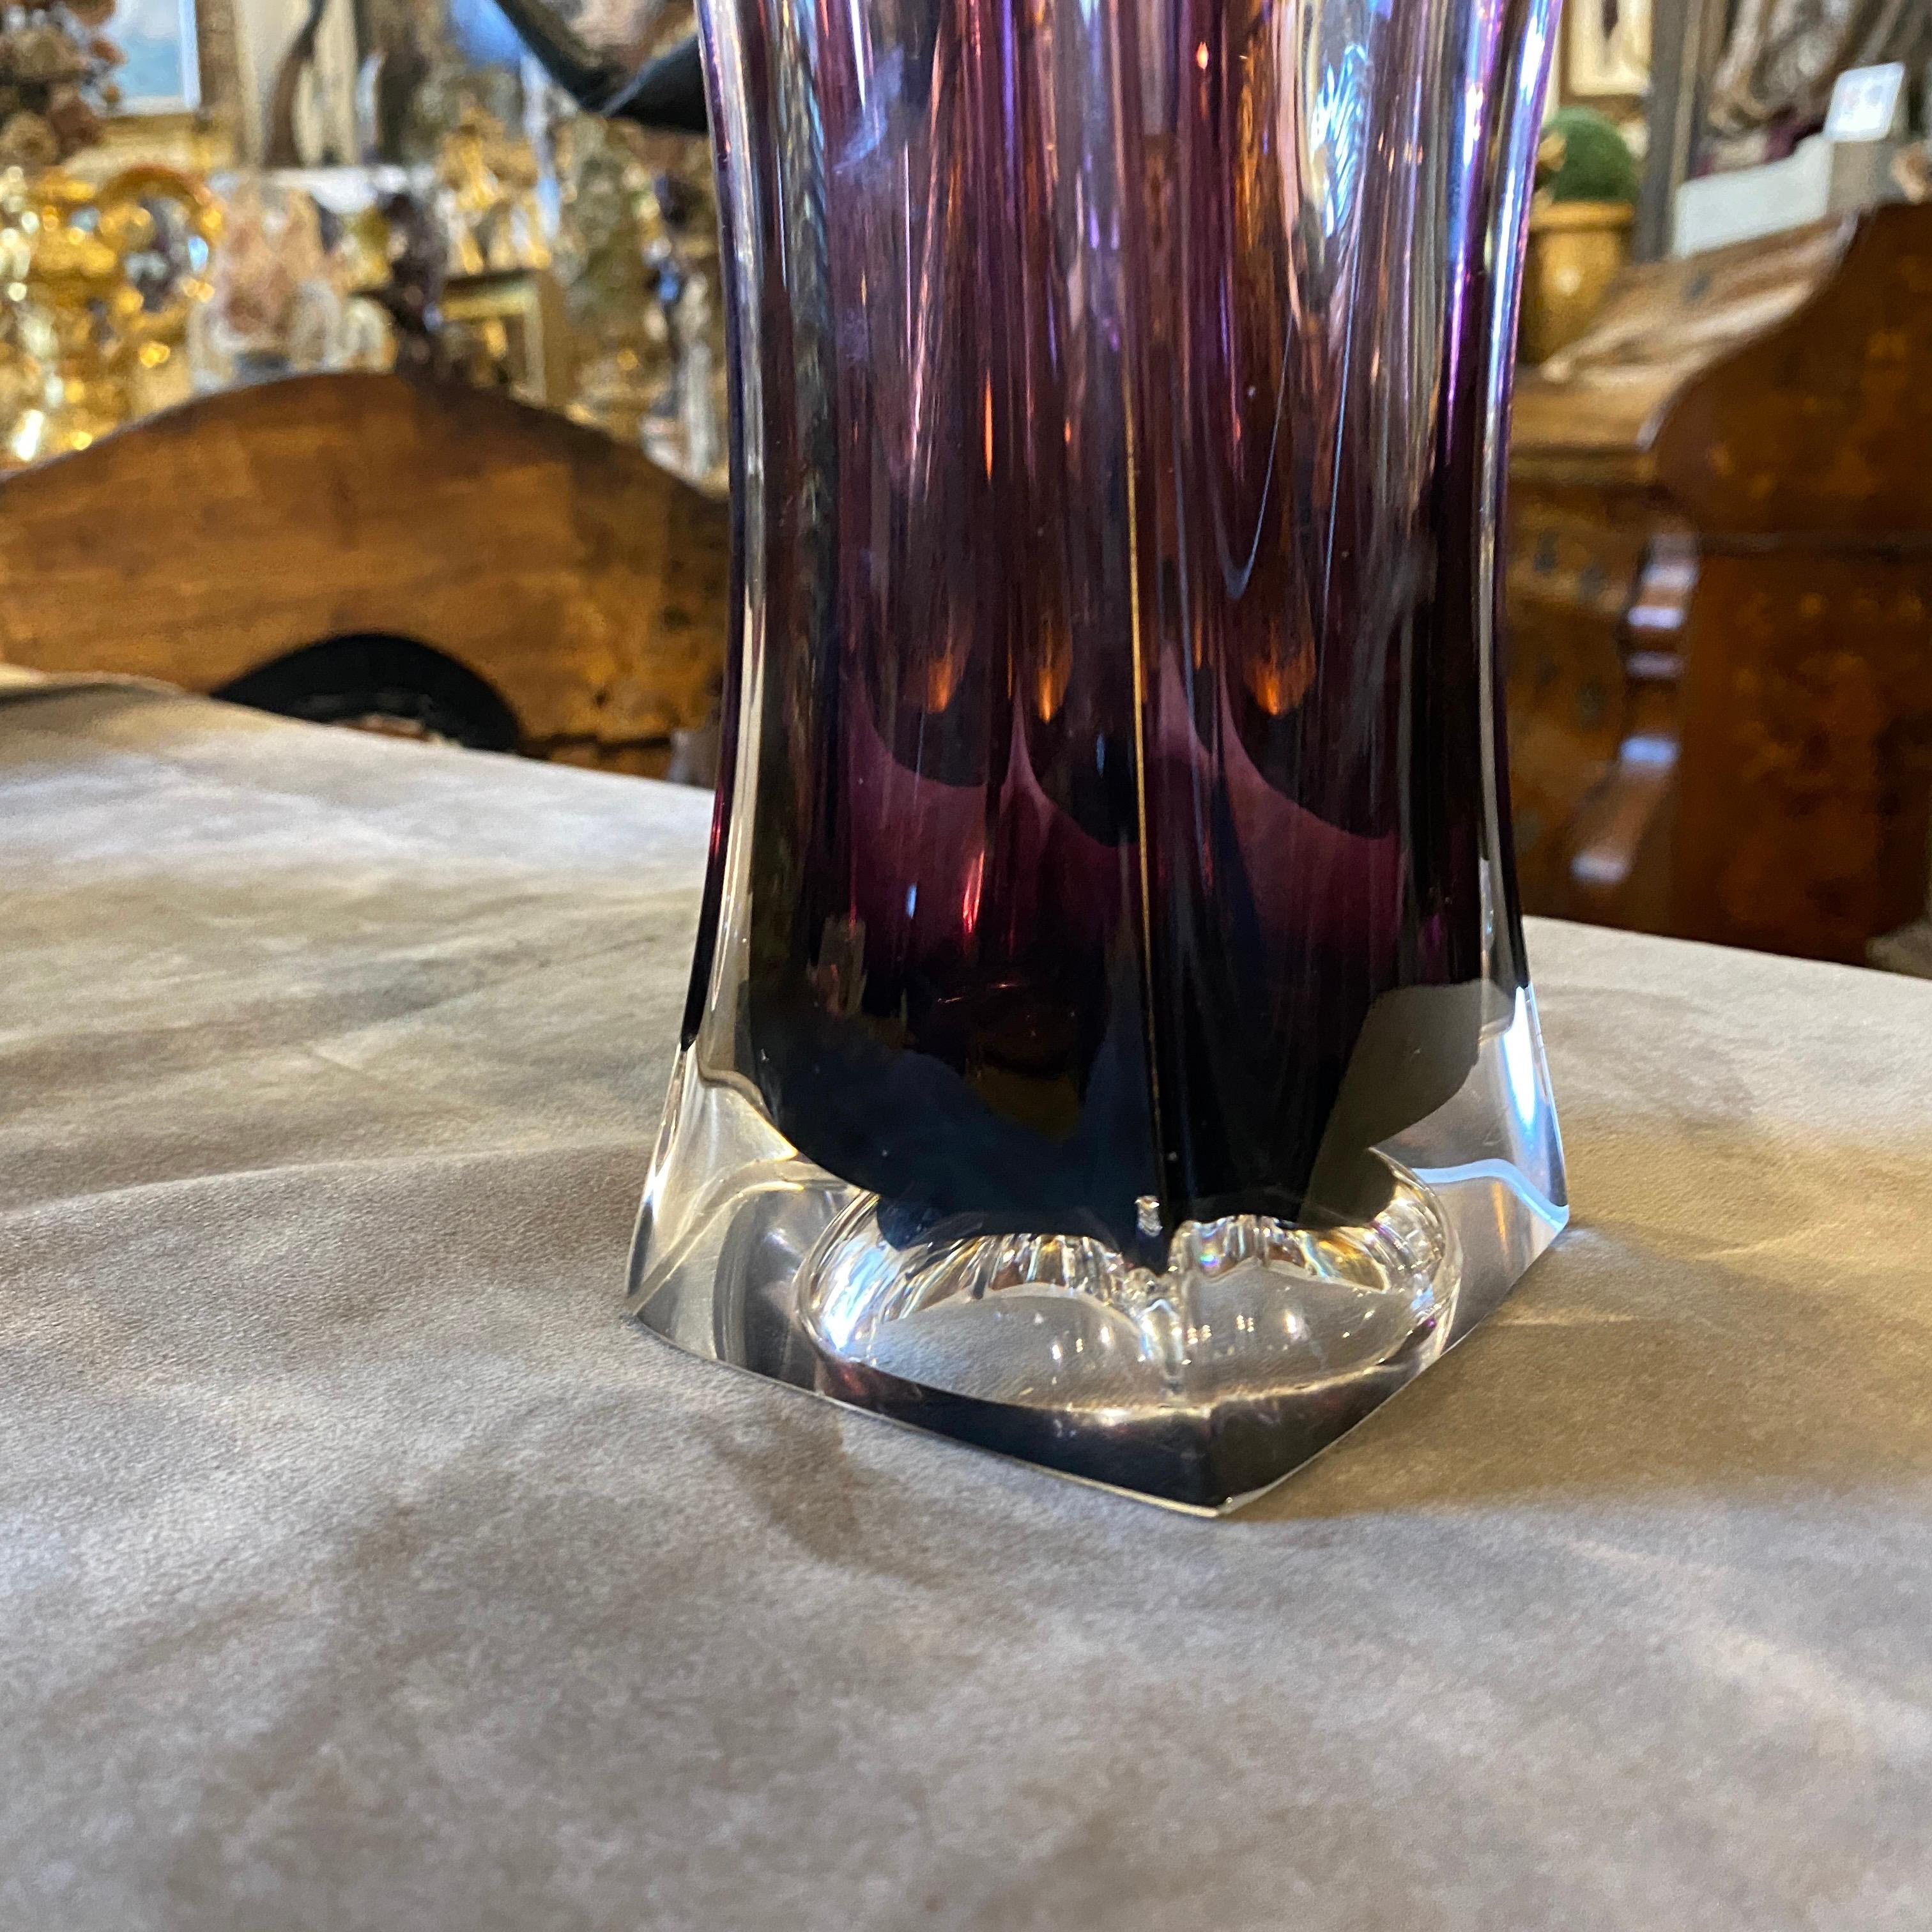 A purple murano glass vase designed and manufactured in the Eighties in Murano, it's in perfect conditions. This vase showcases the distinctive characteristics associated with Murano glass craftsmanship. Sommerso is a technique where layers of